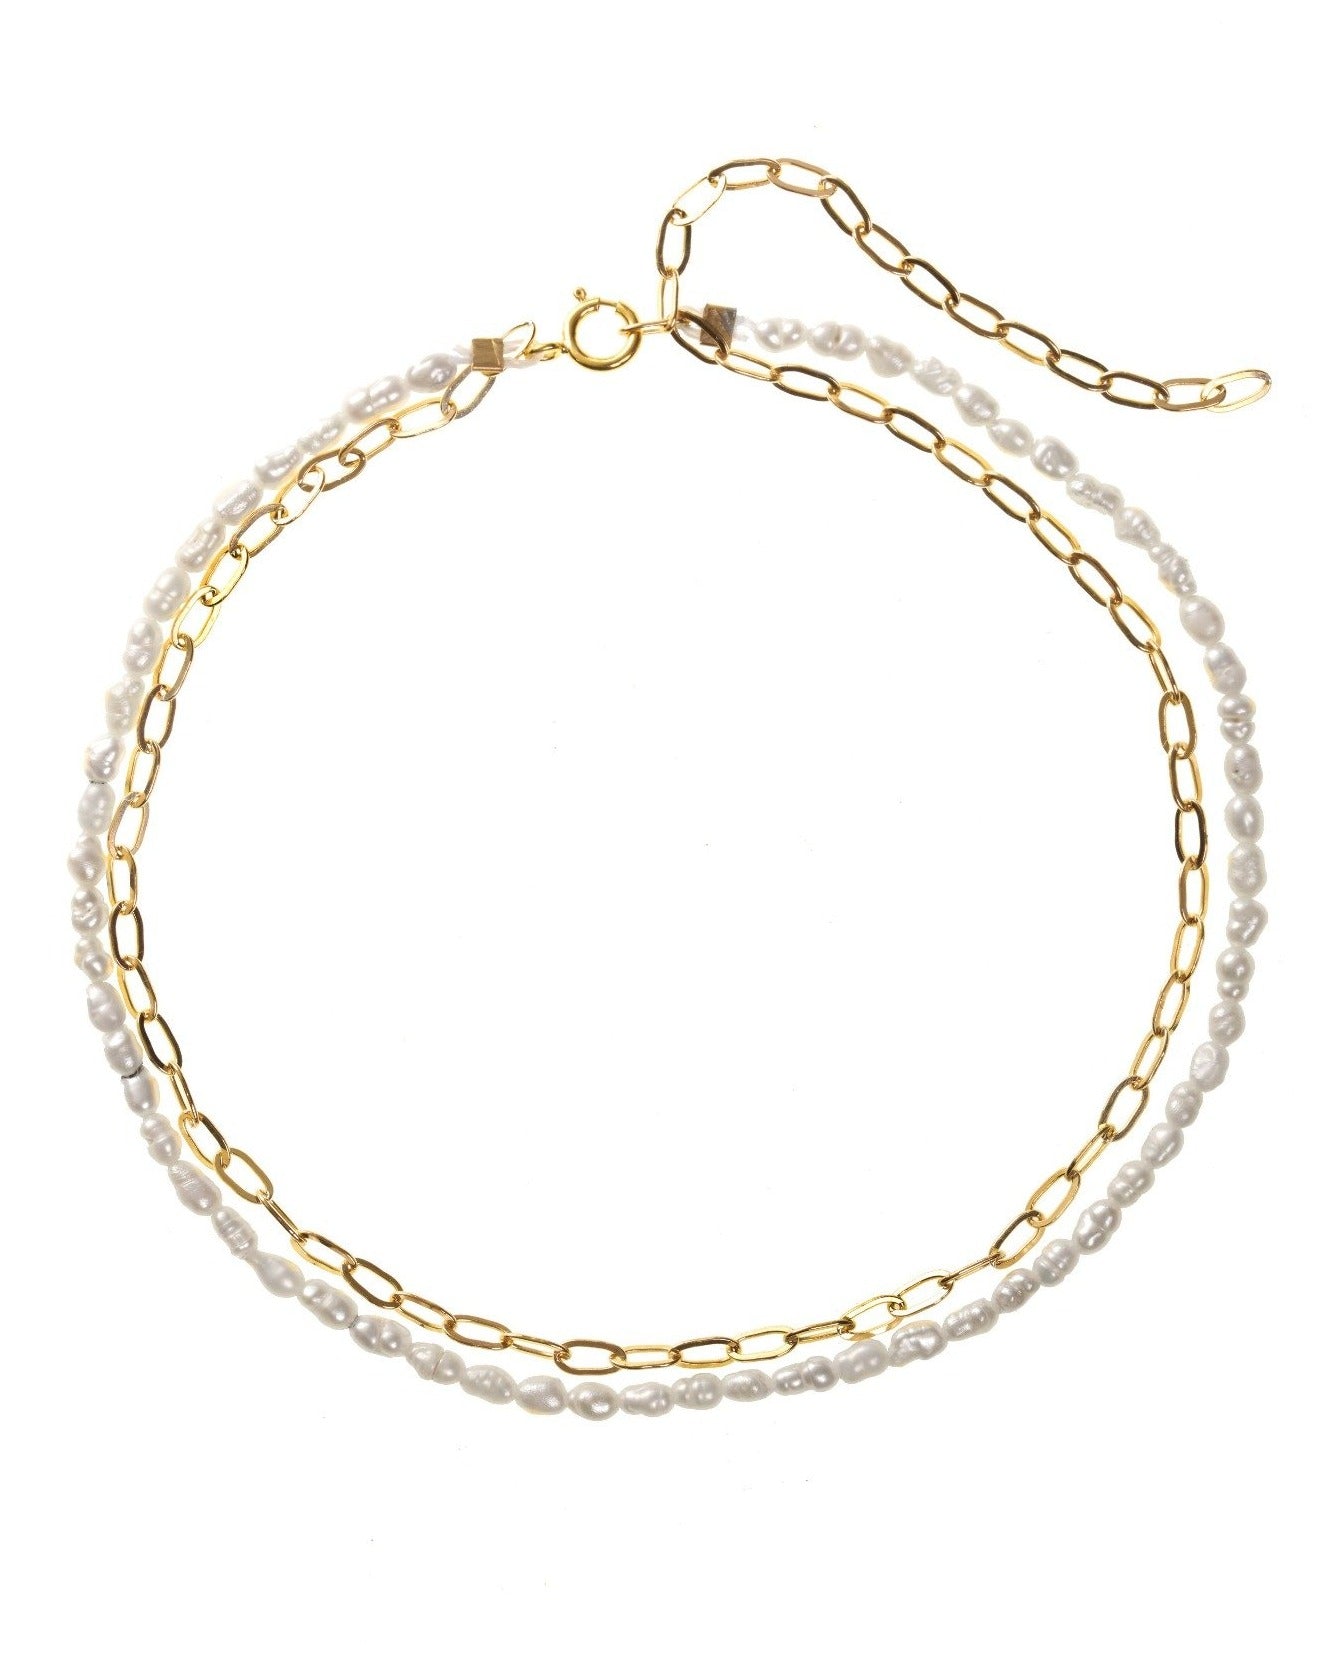 Lamera Anklet by KOZAKH. A 9 to 11 inch adjustable length double anklet. One strand is 14K Gold Filled flat link chain and the other is a strand of 4mm white Rice Pearls.